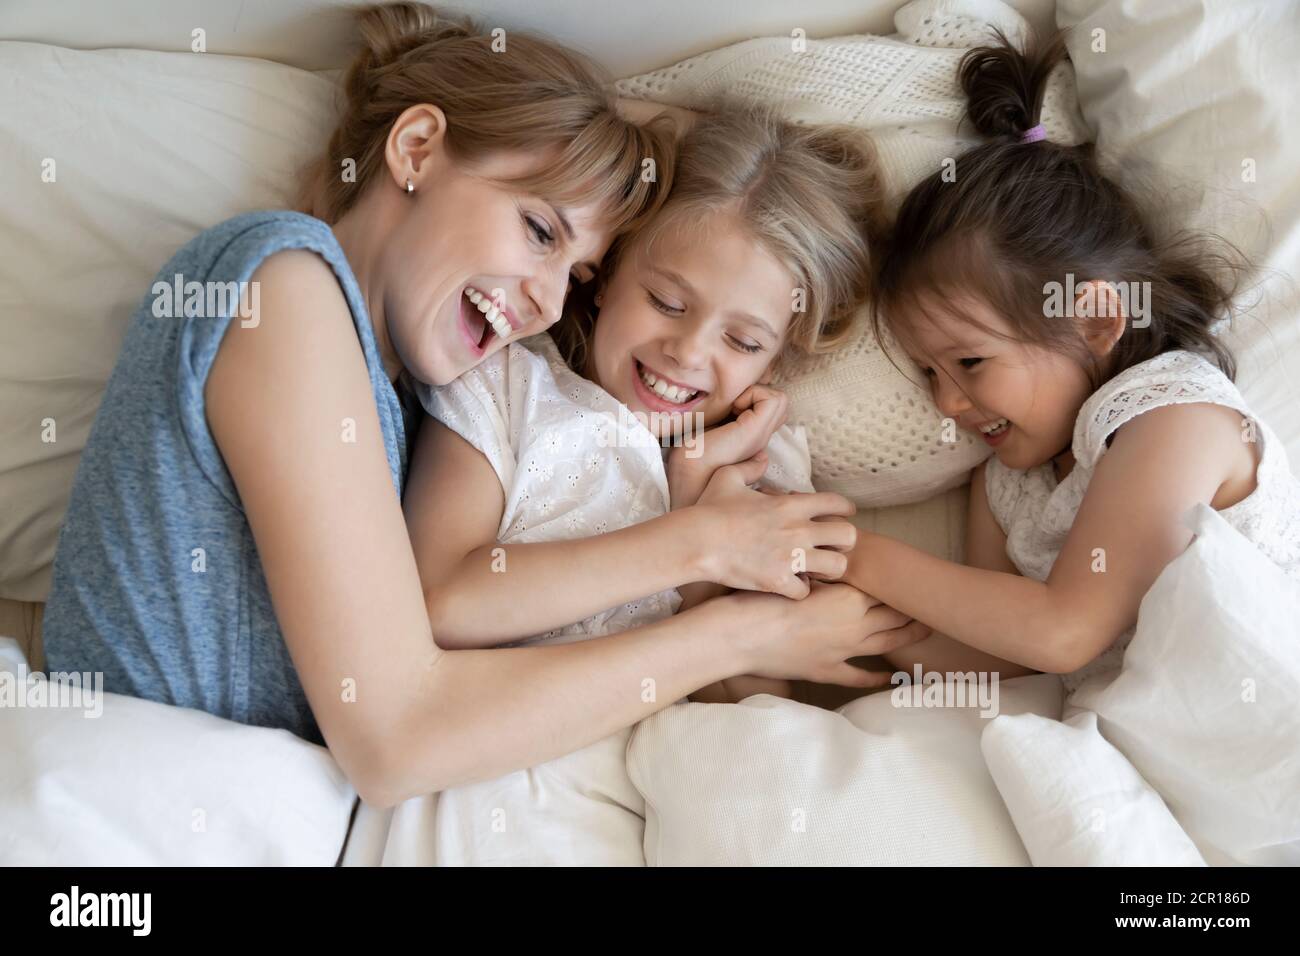 Mum and kids cuddling in bed Stock Photo